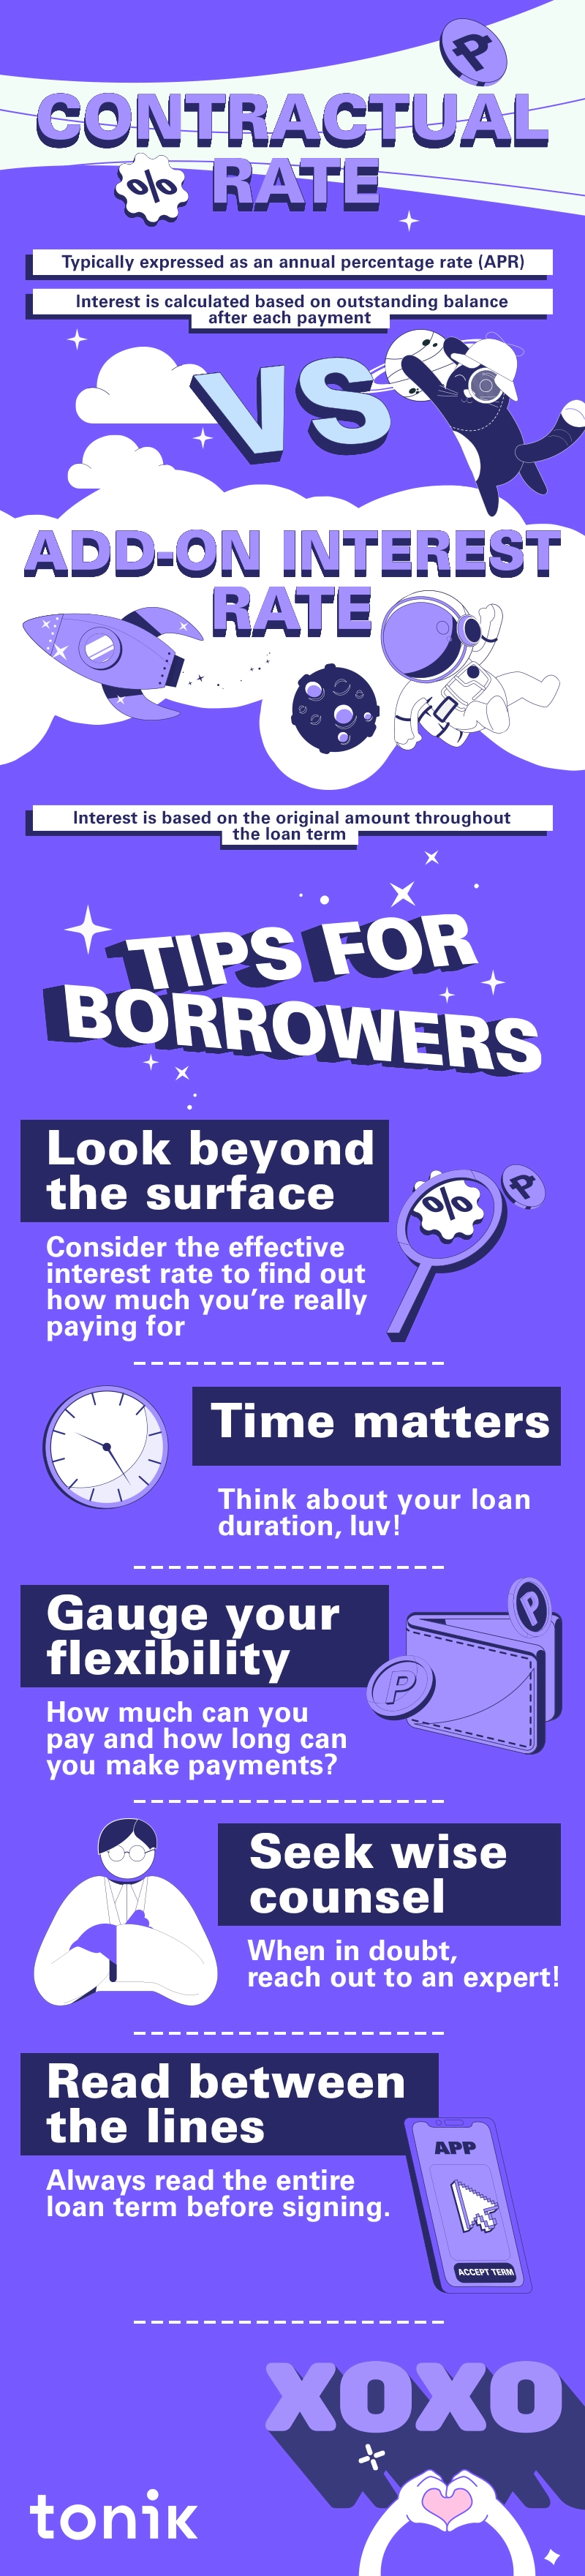 an infographic that shows the difference between add-on and contractual interest rates